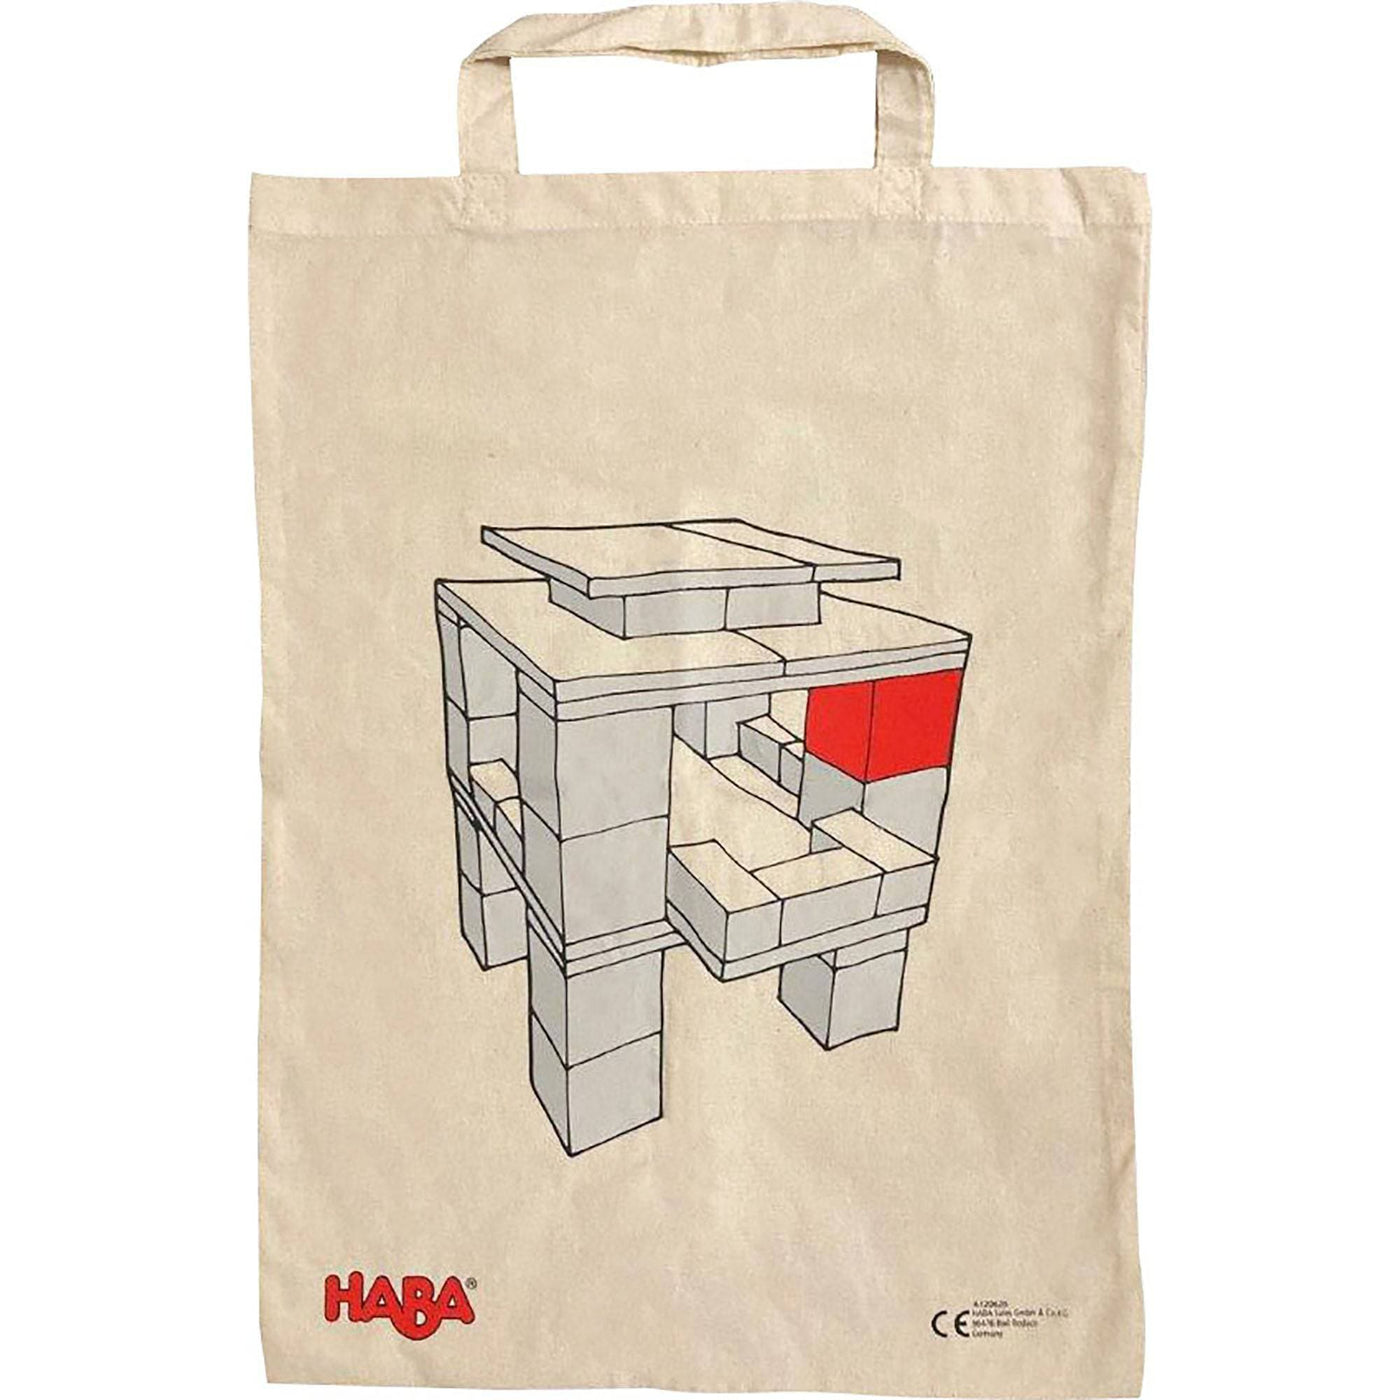 Clever Up! Building Block System 2.0 - HABA USA